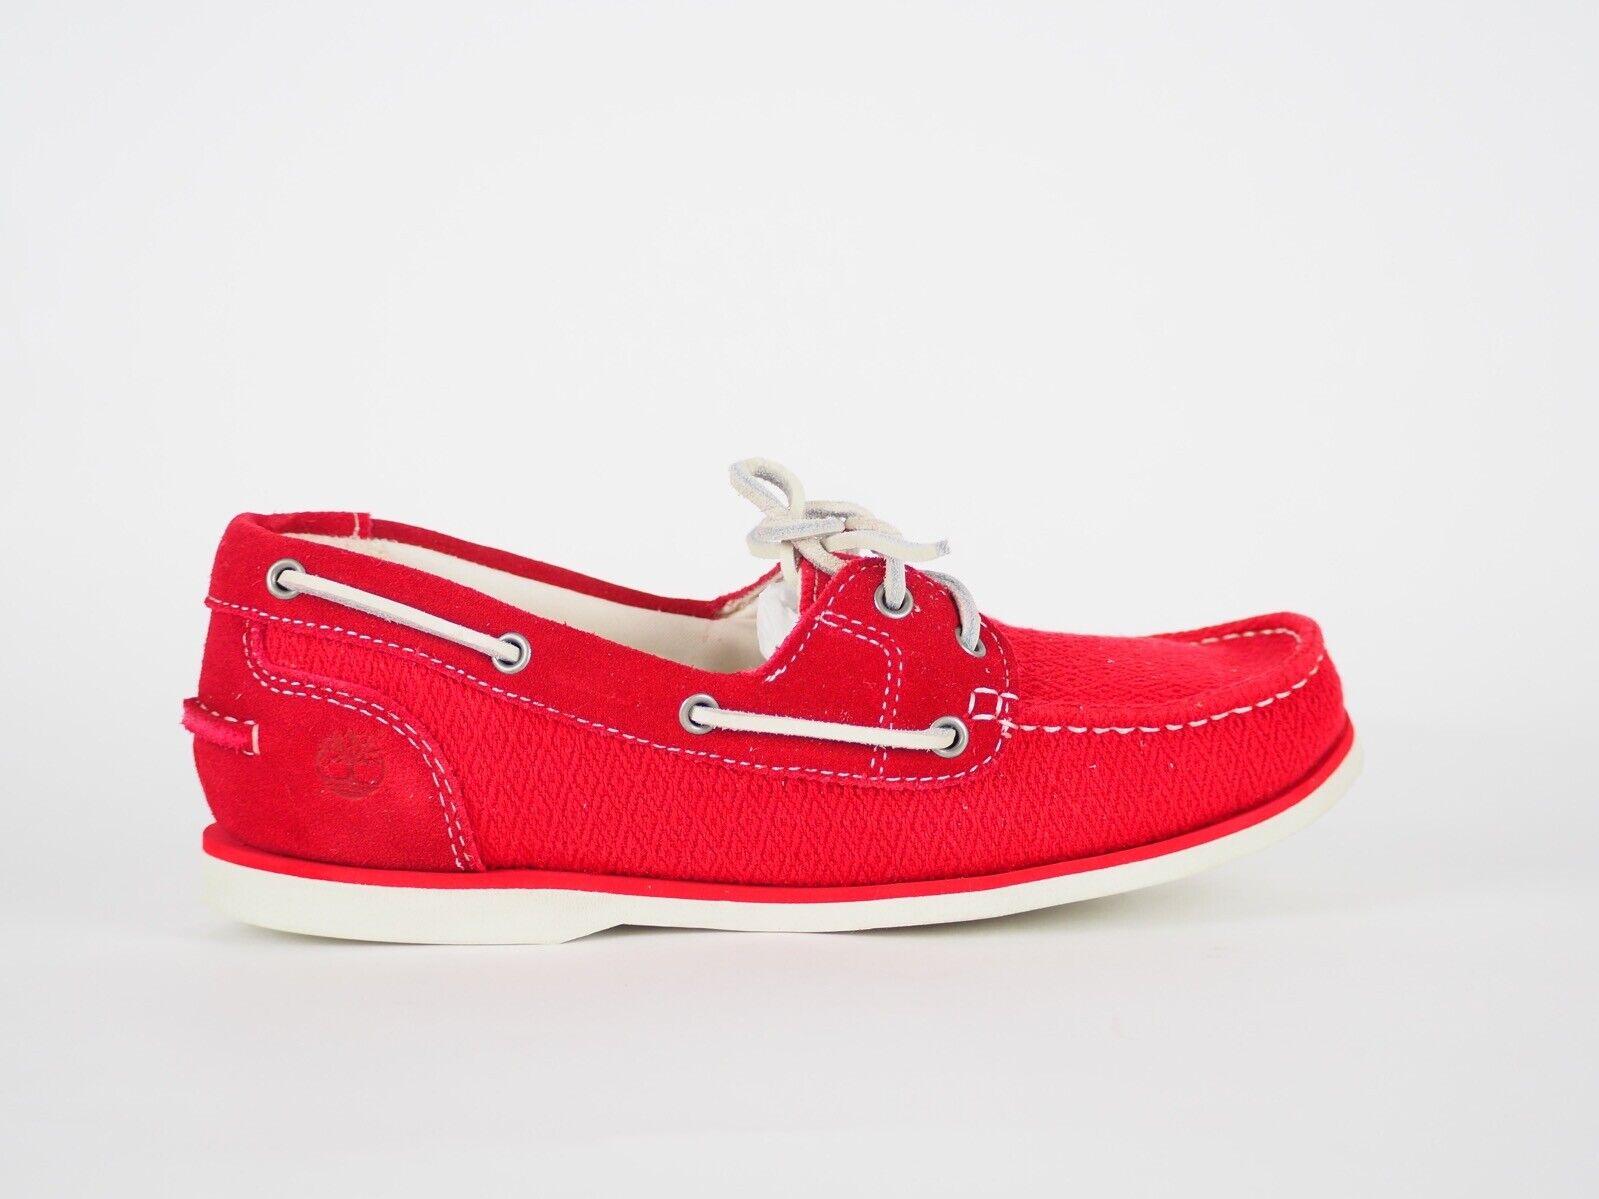 Womens Timberland Classic 2 Eye A14LV Red Fabric Textured Boat Shoes - London Top Style